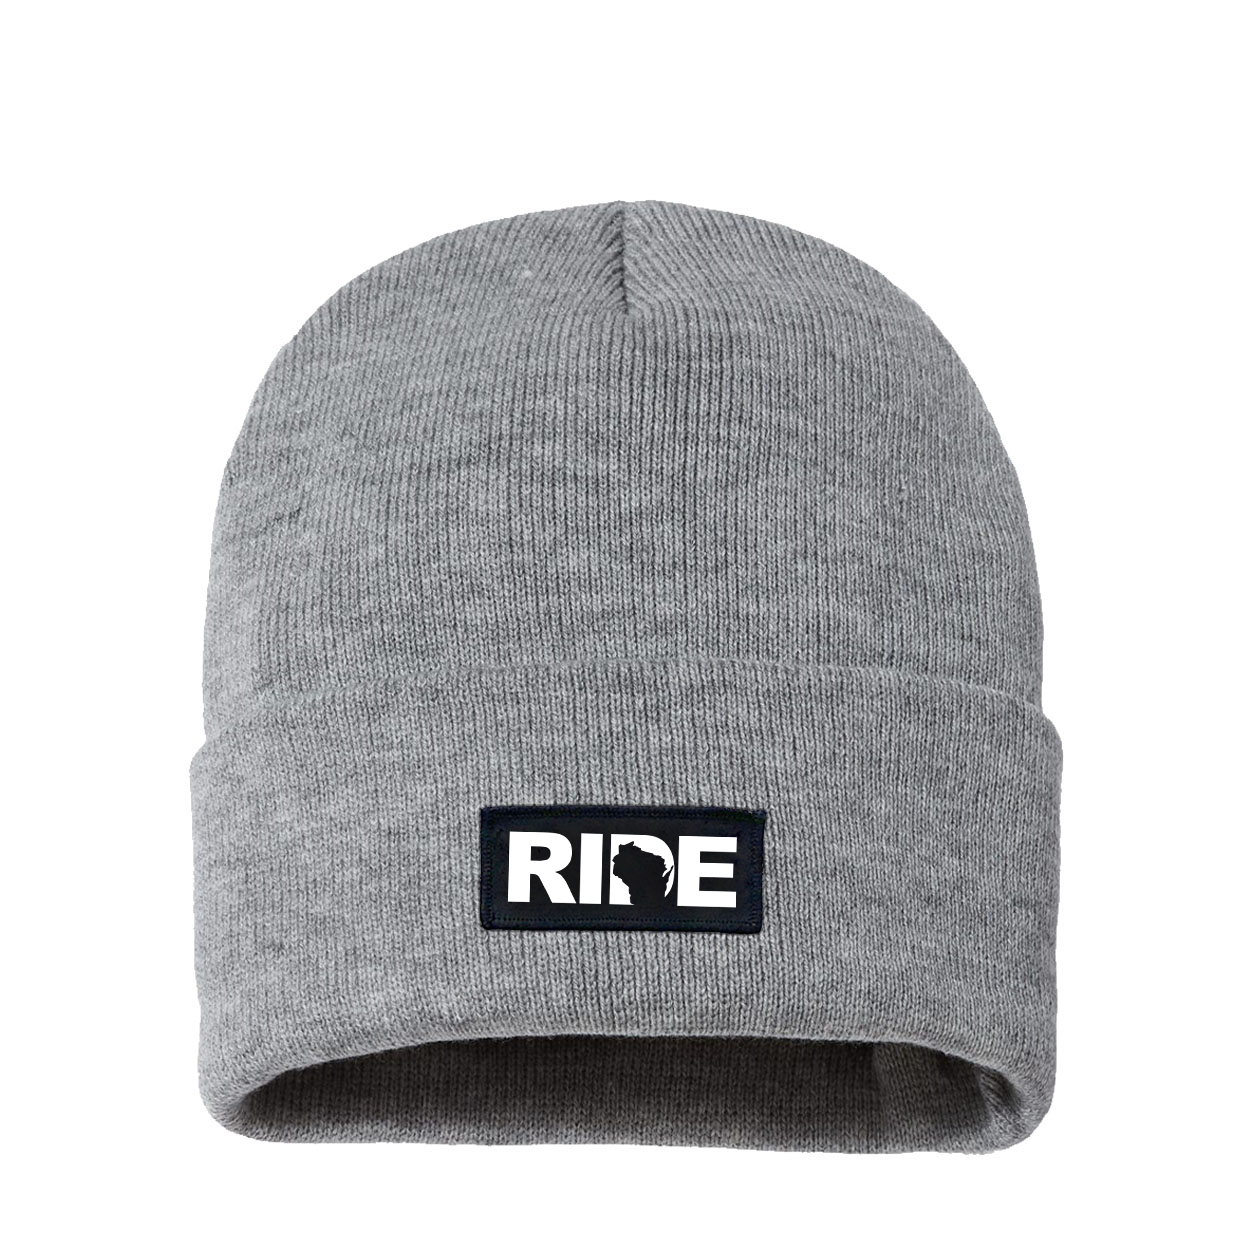 Ride Wisconsin Night Out Woven Patch Sherpa Lined Cuffed Beanie Heather Gray (White Logo)